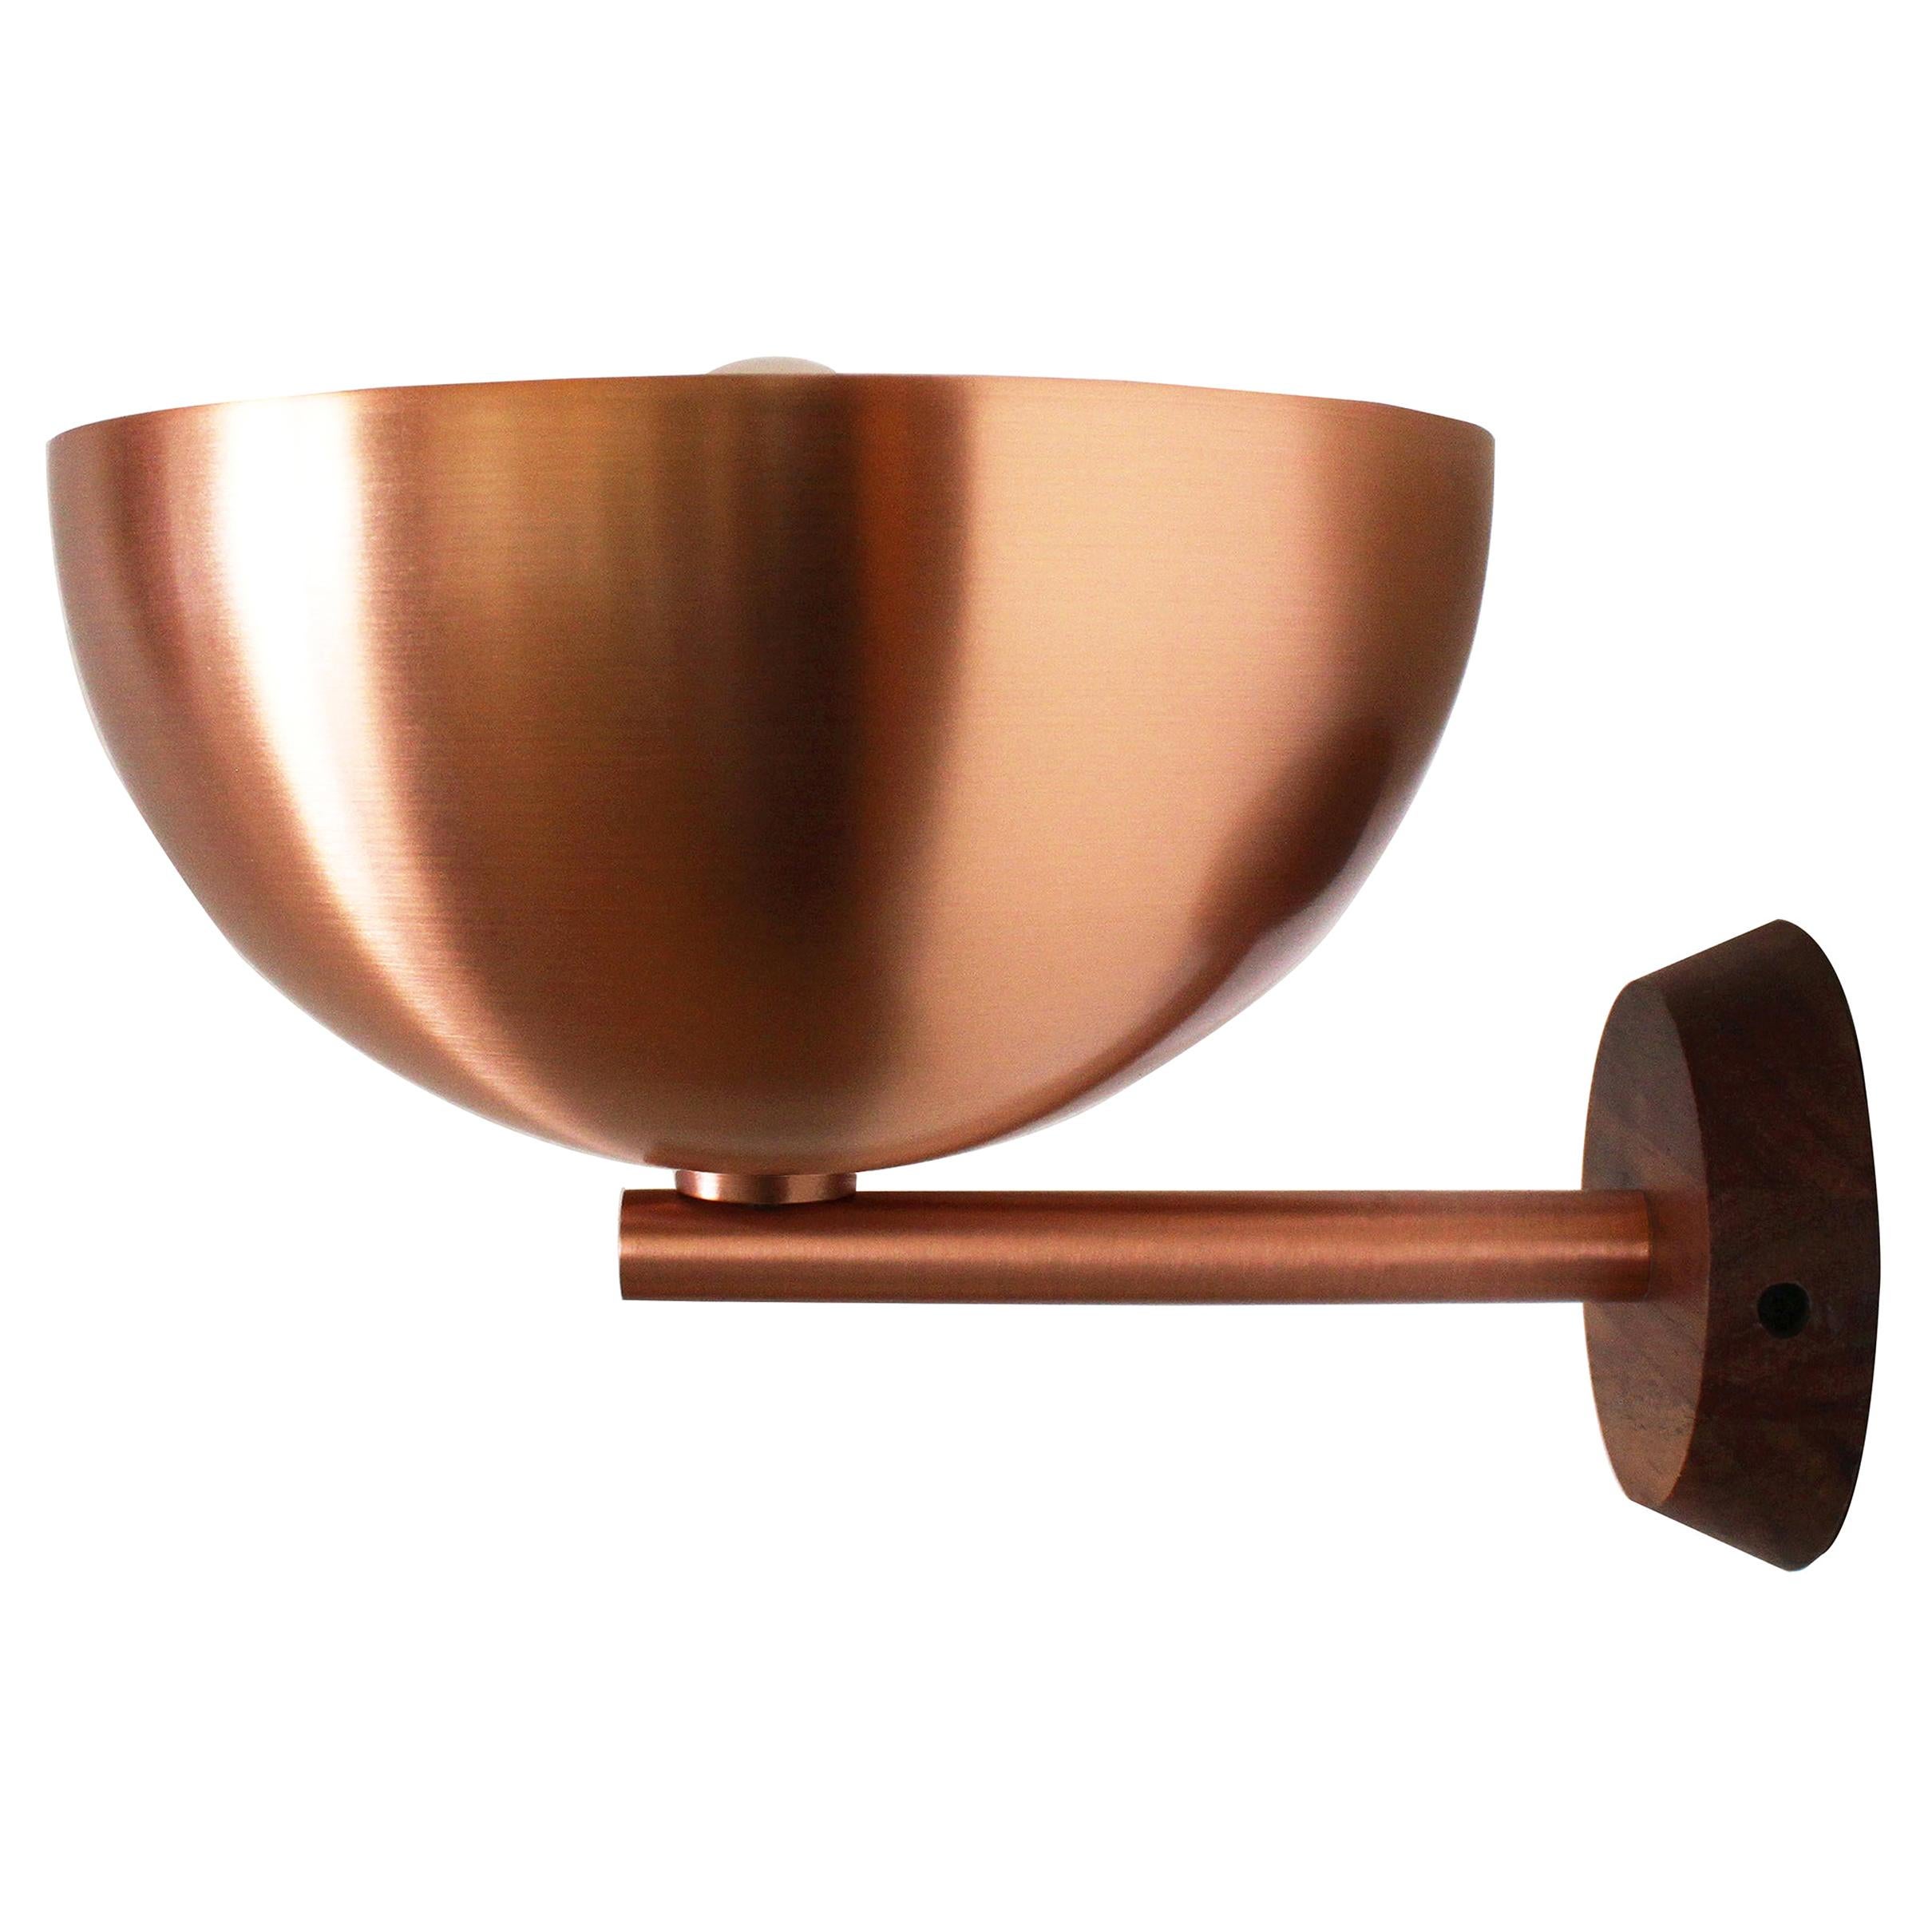 Clasica A Muro Wall Sconce by Maria Beckmann, Represented by Tuleste Factory